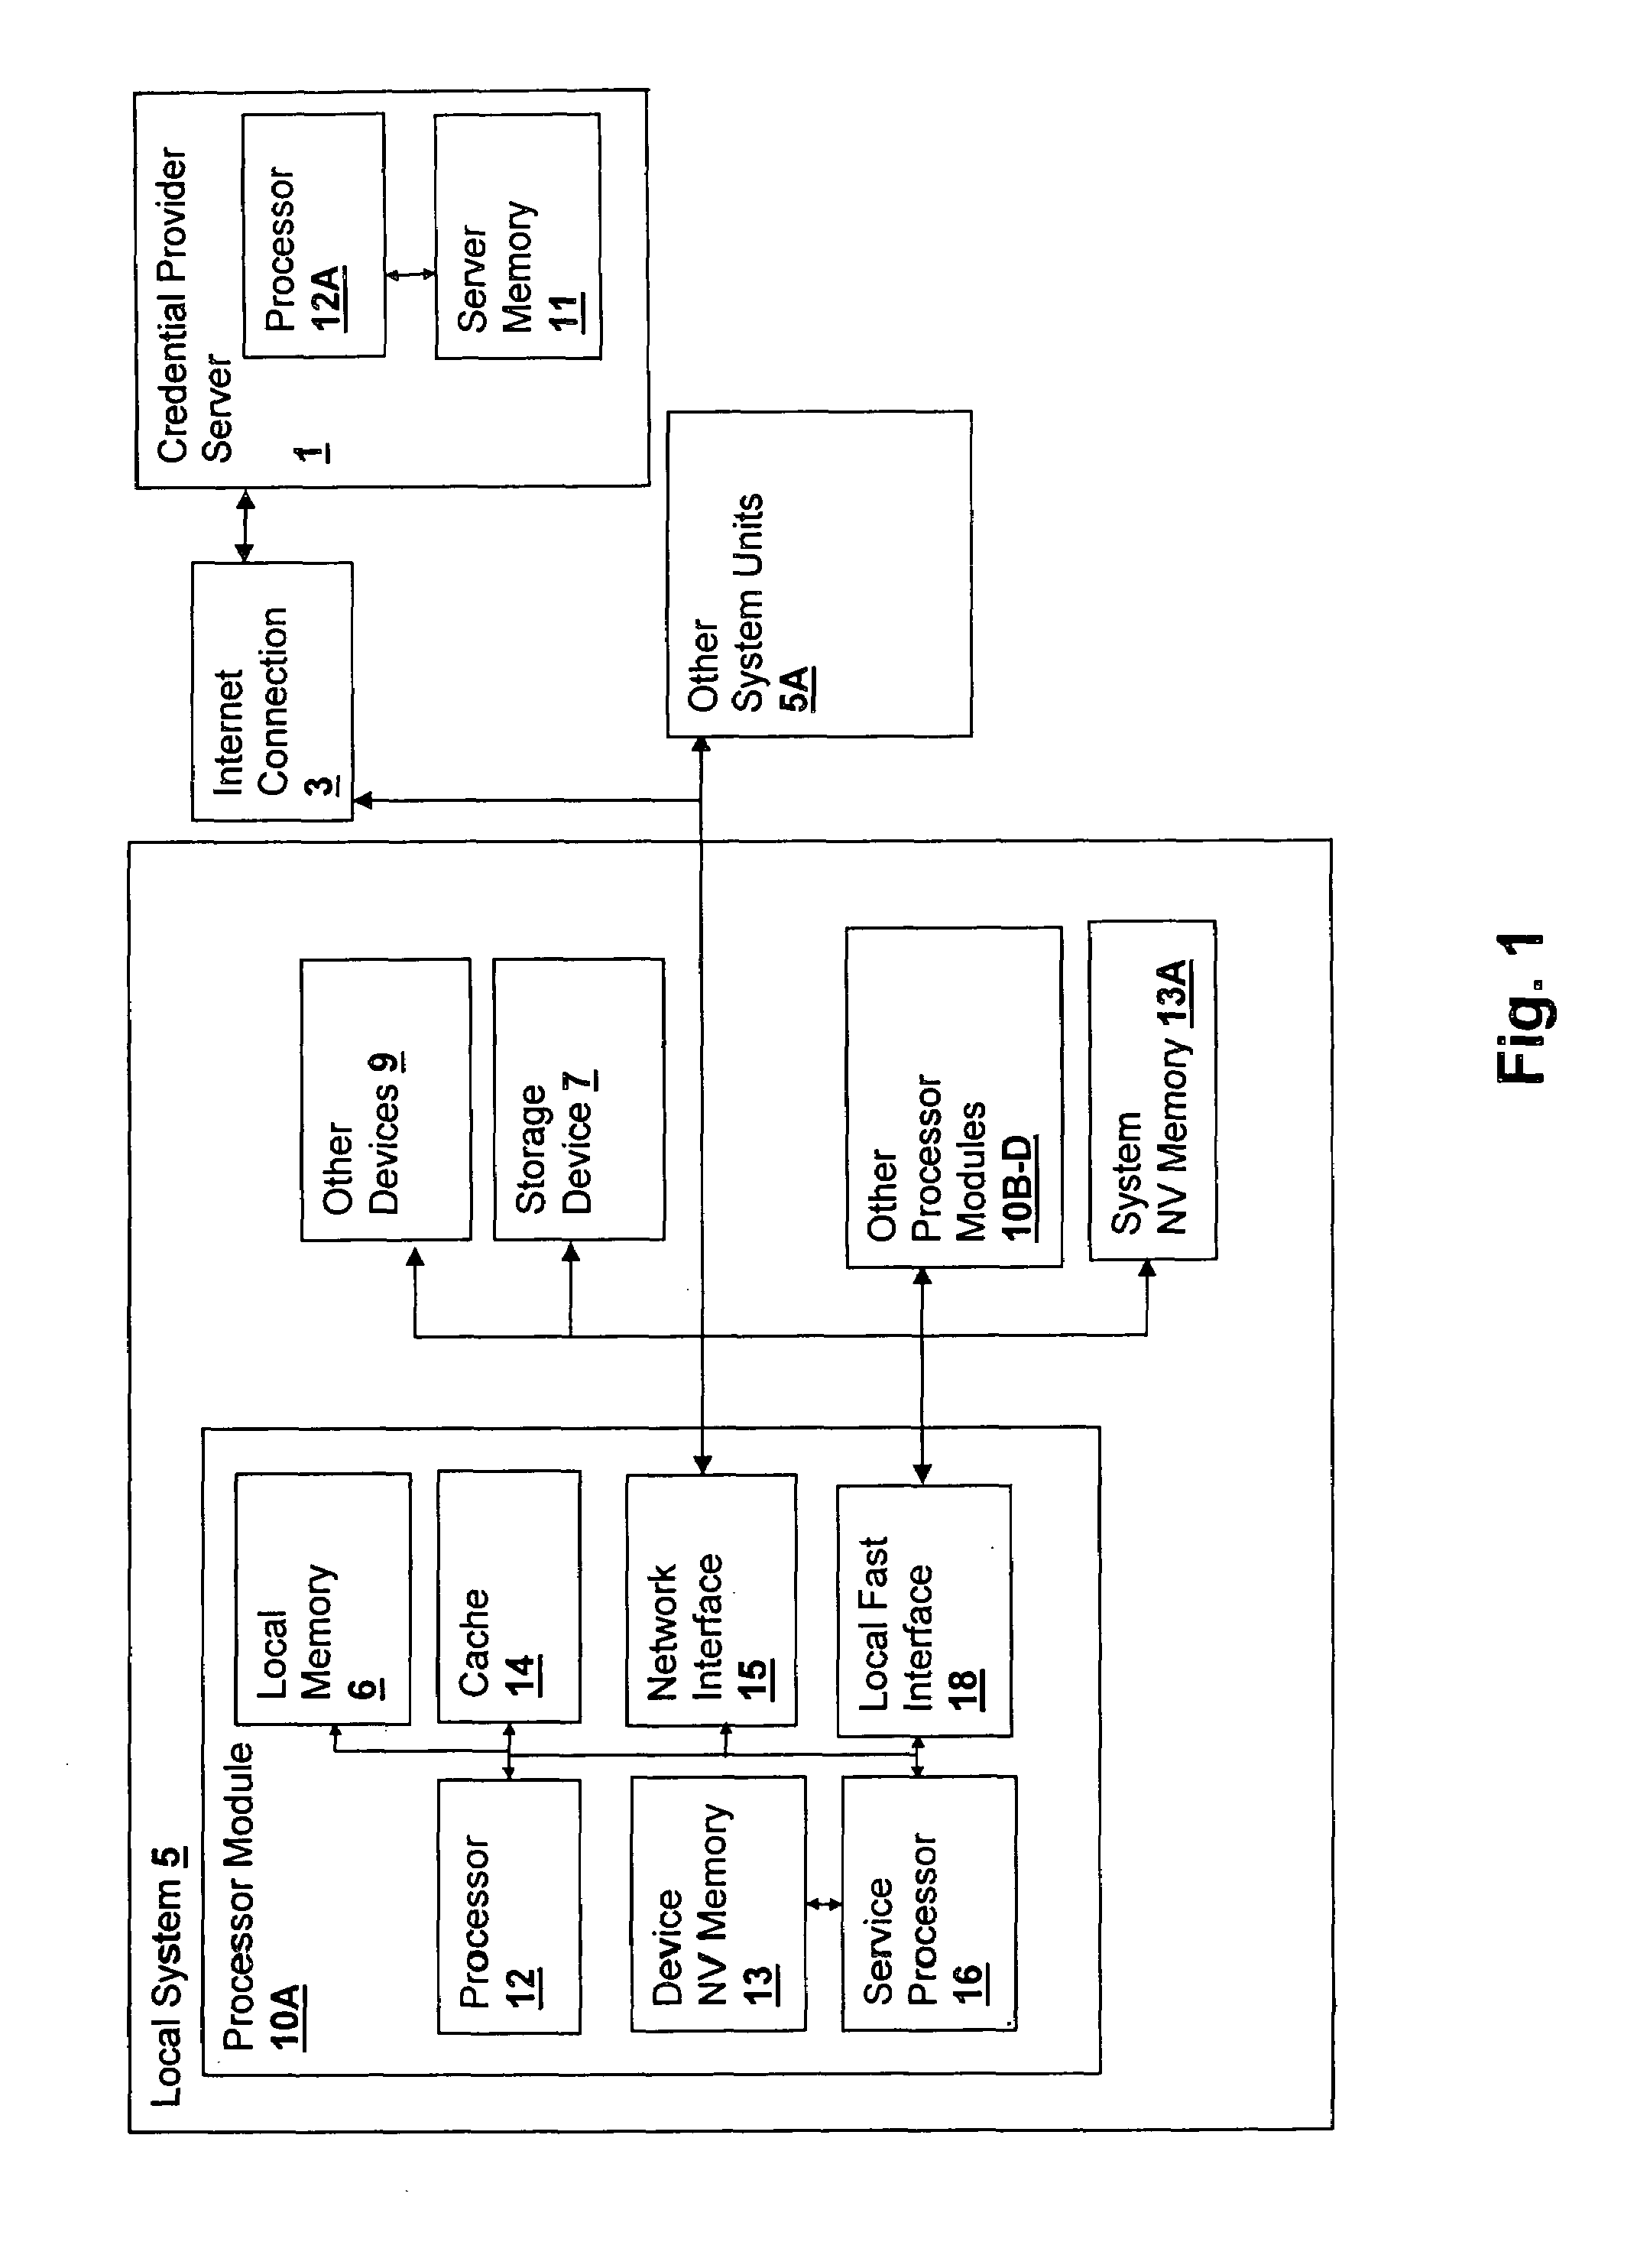 Method and system for verifying binding of an initial trusted device to a secured processing system